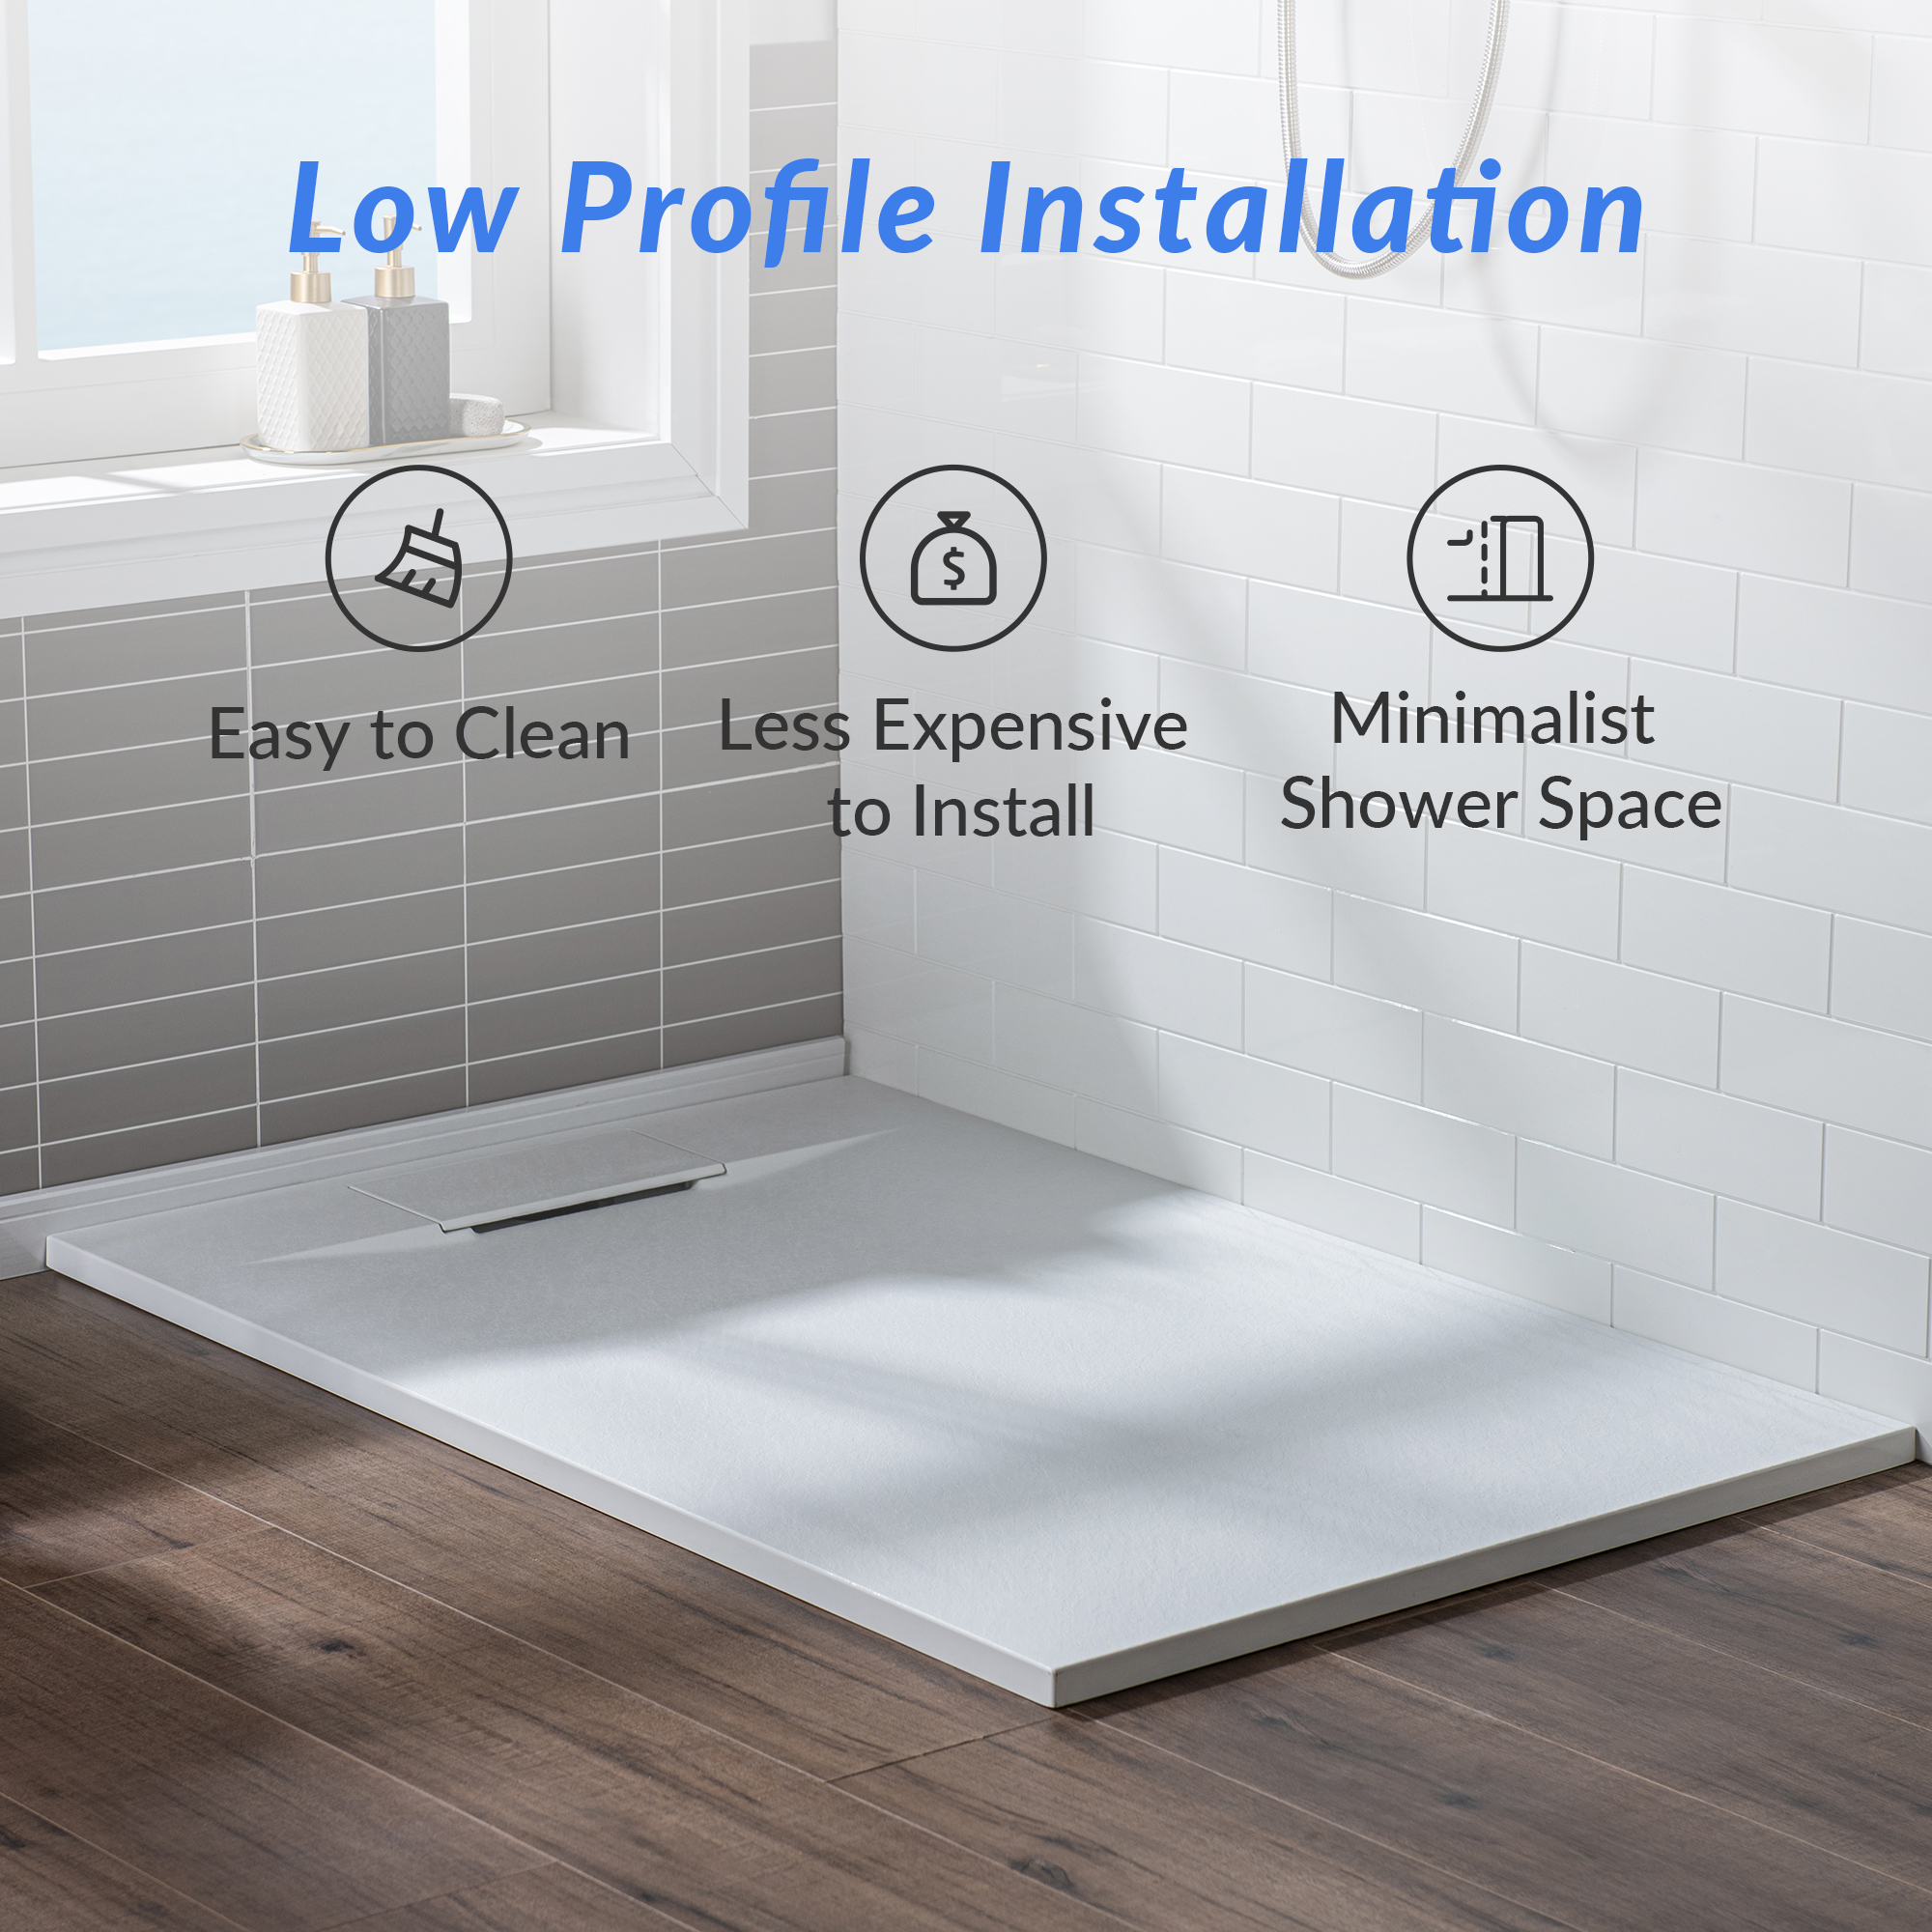  WOODBRIDGE 48-in L x 32-in W Zero Threshold End Drain Shower Base with Reversable Drain Placement, Matching Decorative Drain Plate and Tile Flange, Wheel Chair Access, Low Profile, White_12340